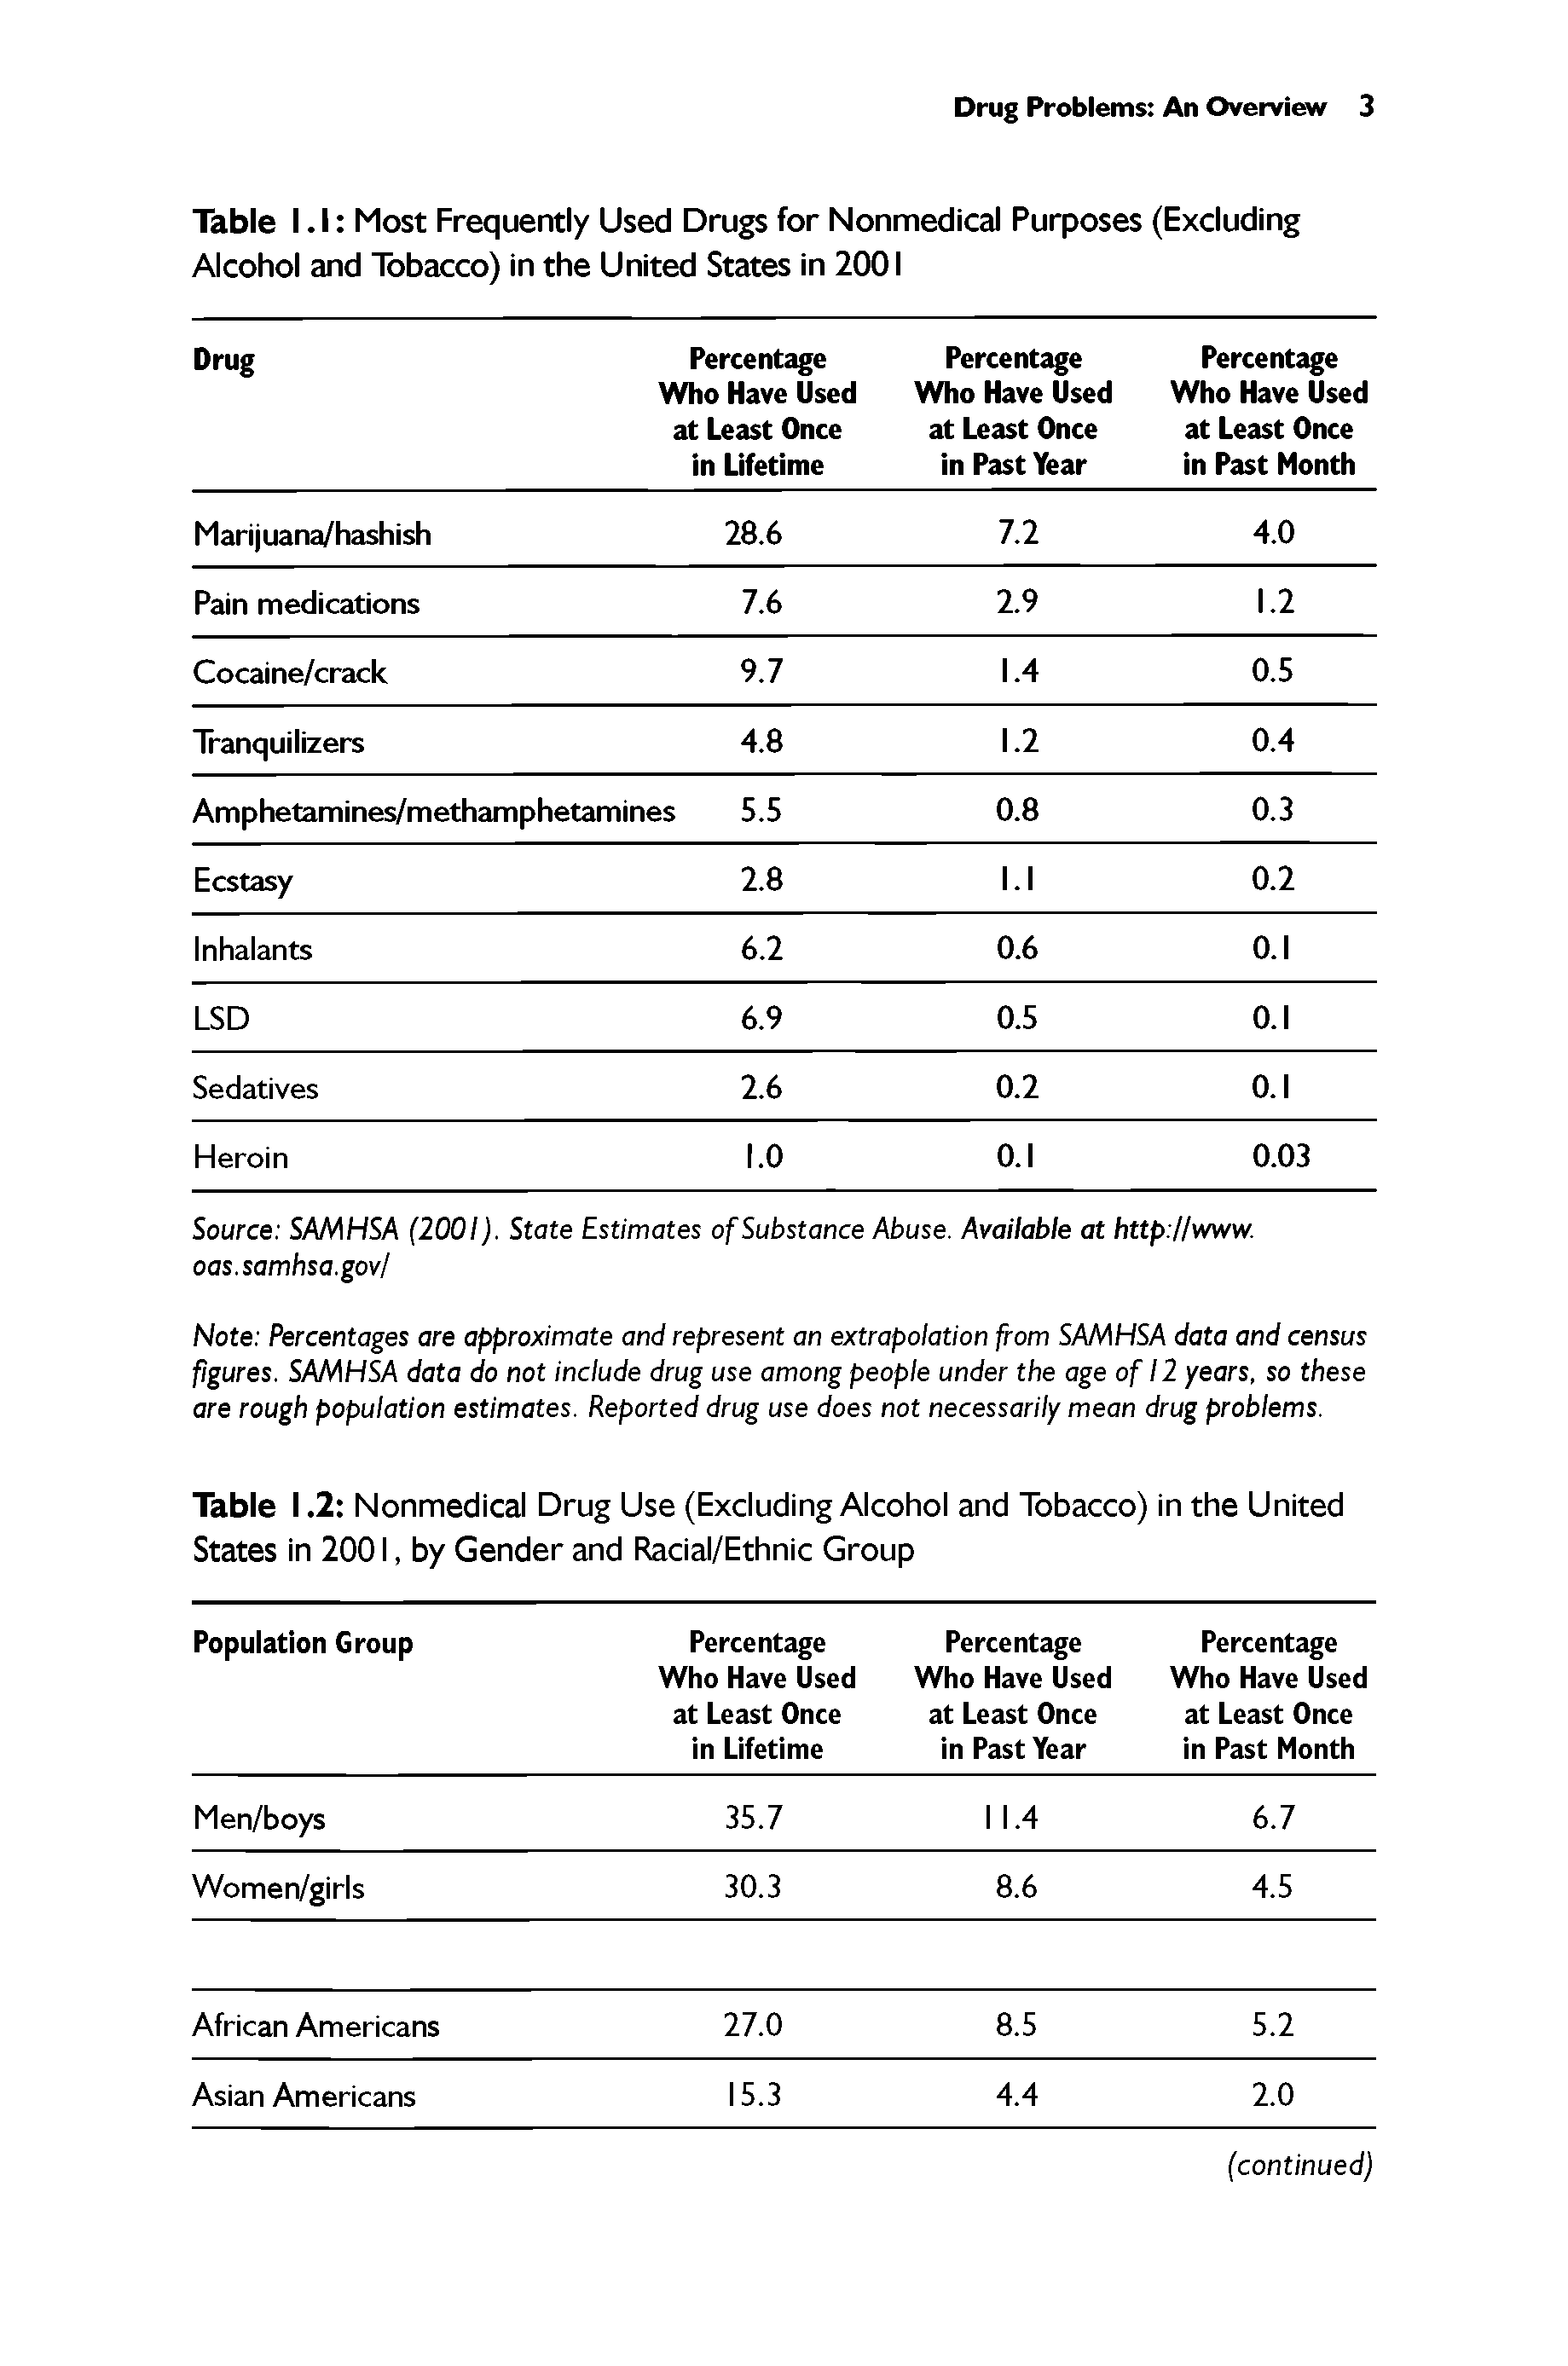 Table I. I Most Frequently Used Drugs for Nonmedical Purposes (Excluding Alcohol and Tobacco) in the United States in 2001...